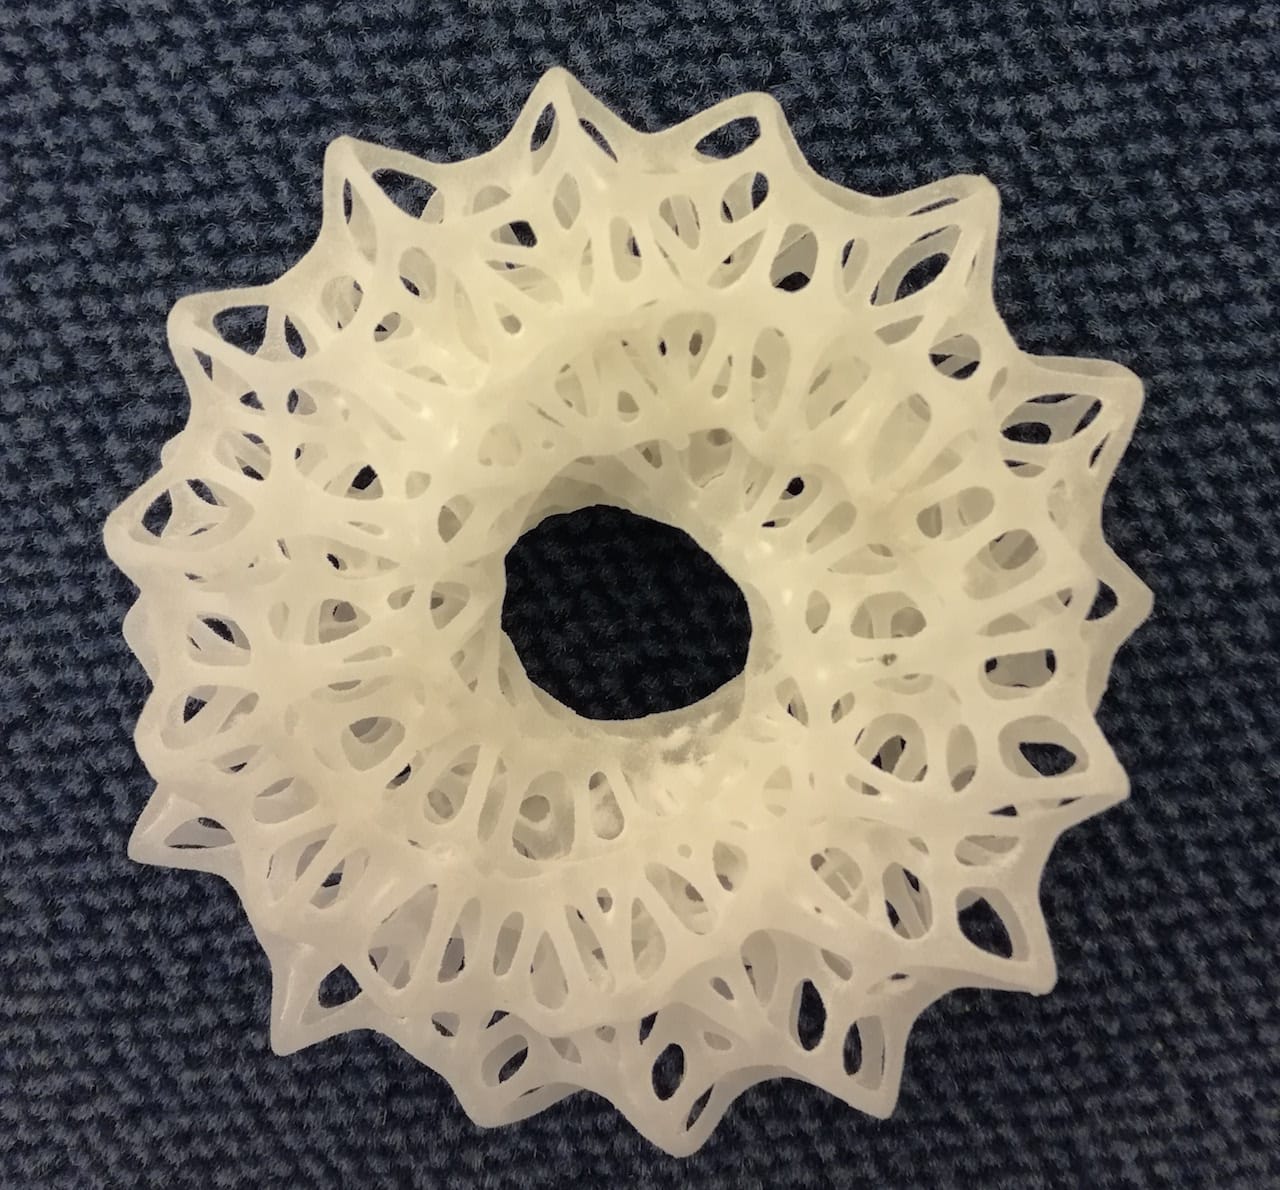  A part 3D printed using the SLS process but in polypropylene 